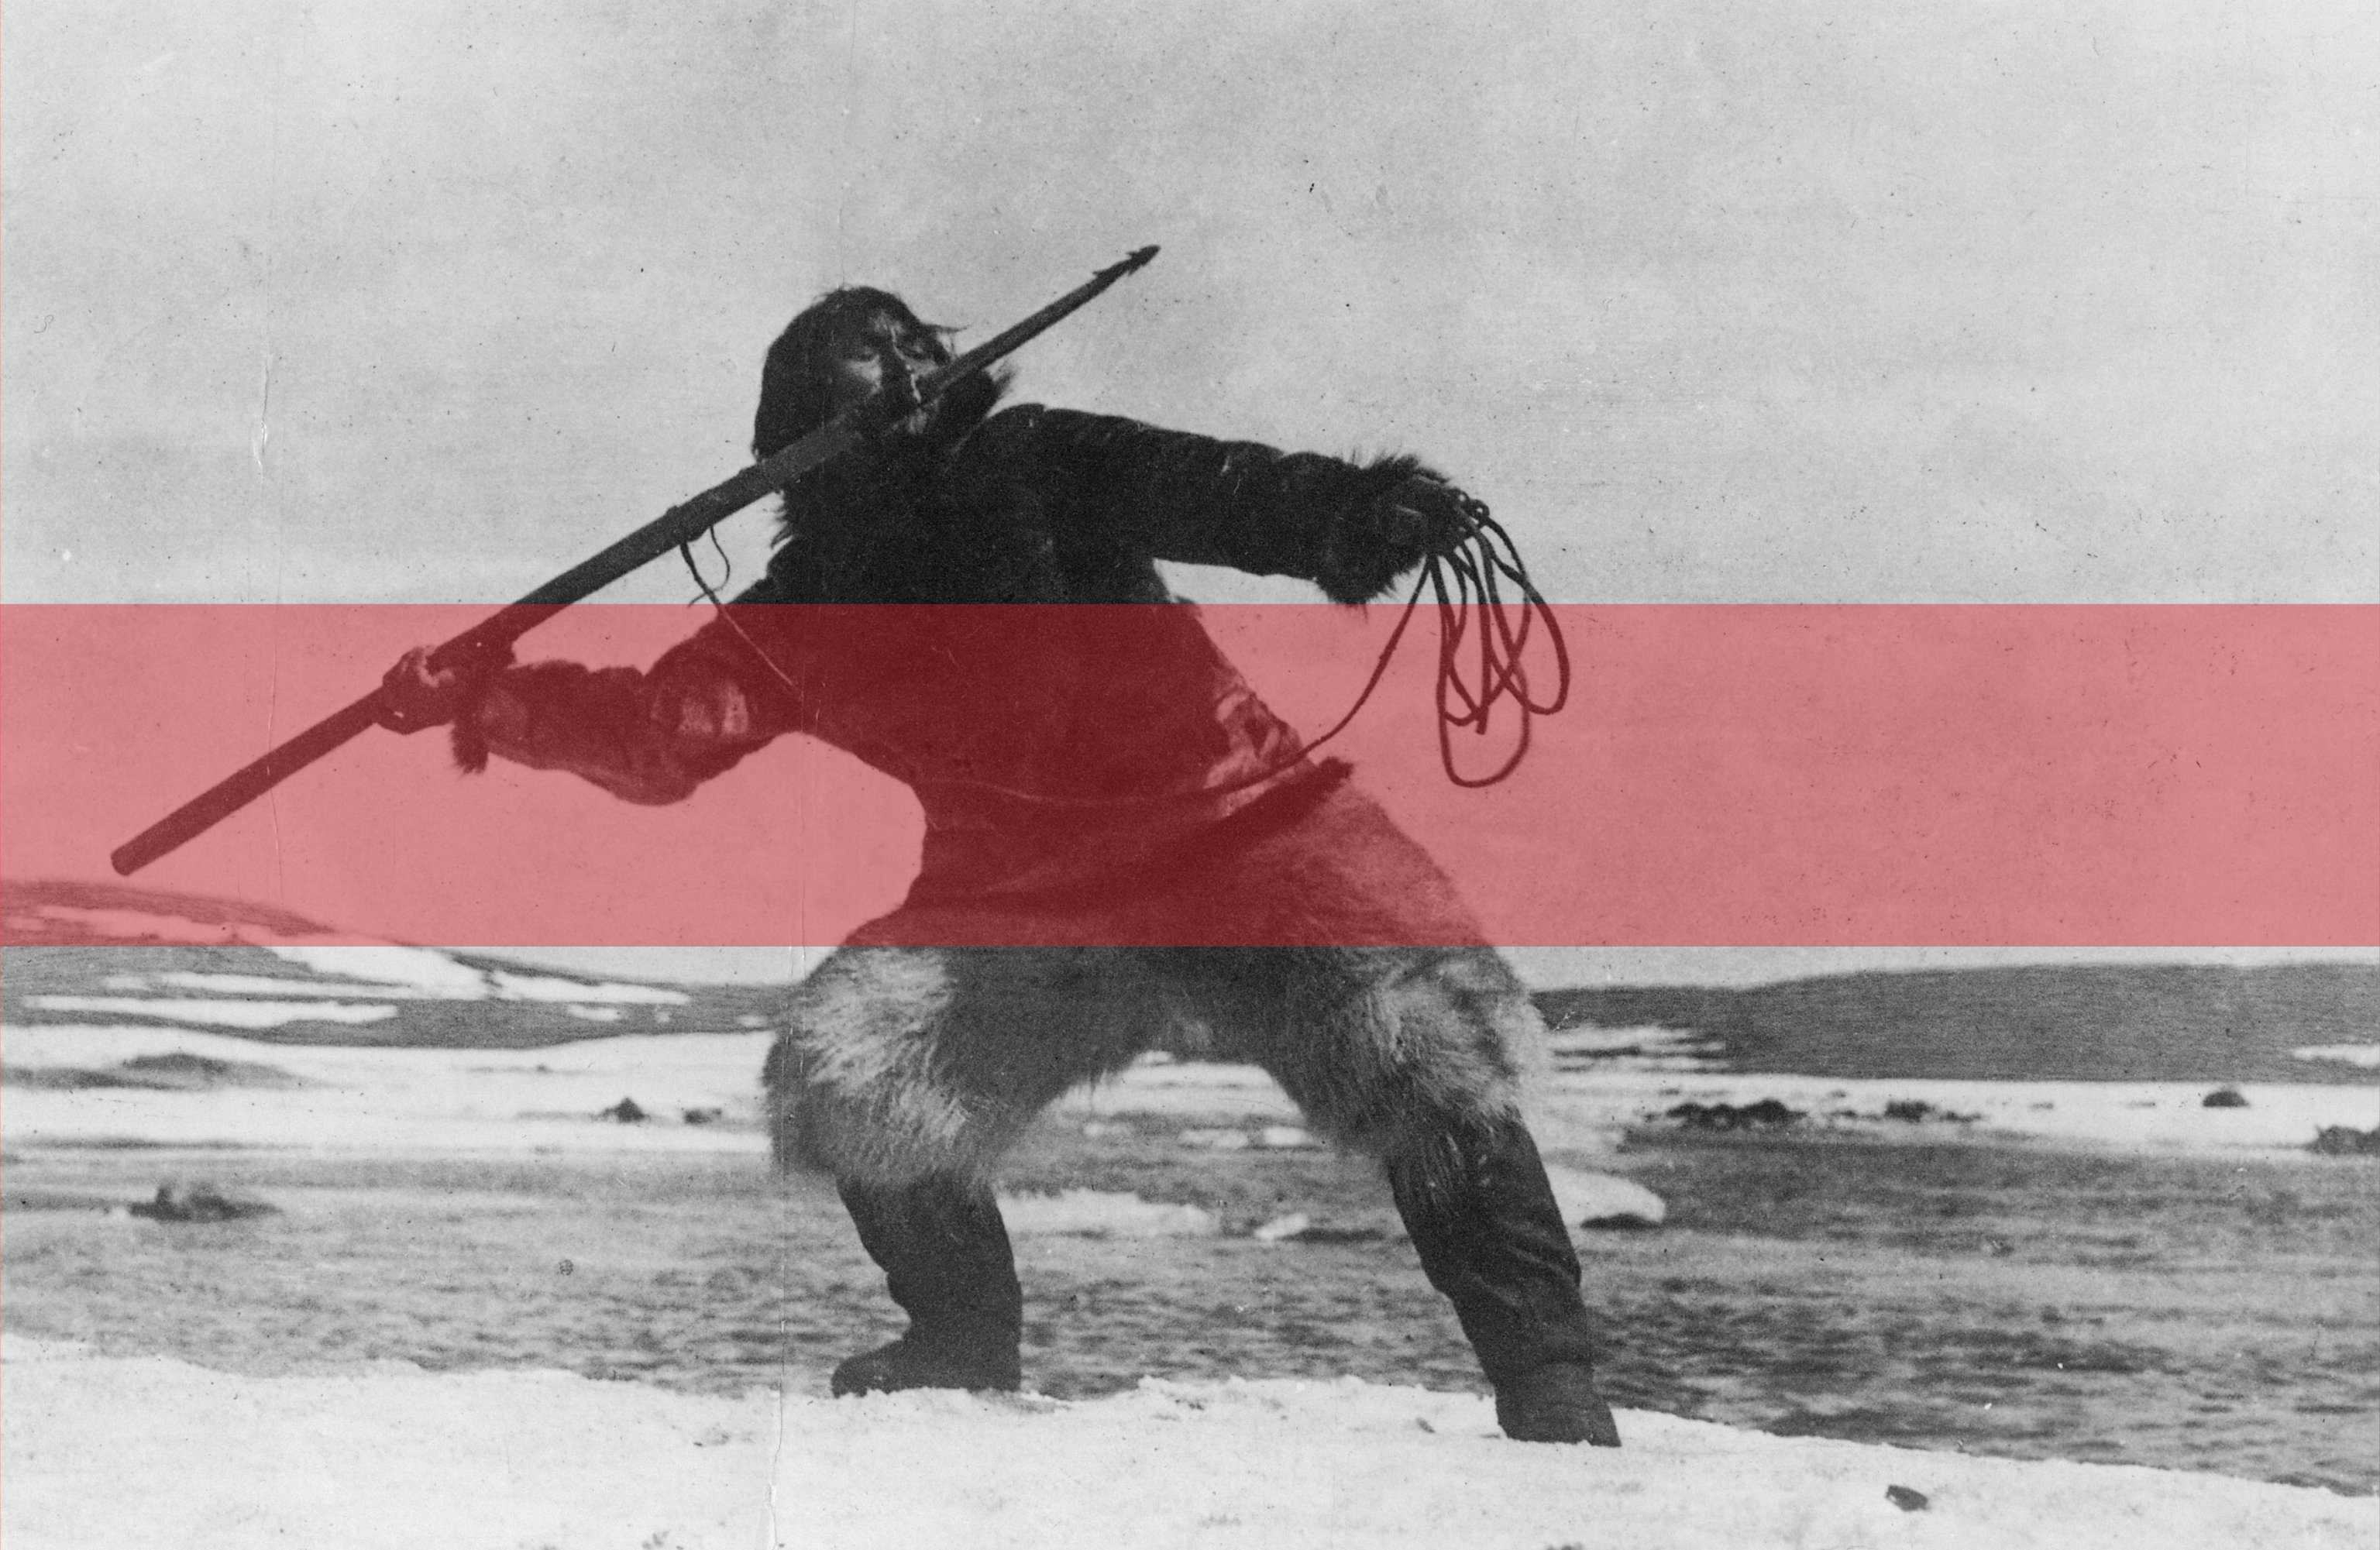 A man standing on an icy landscape wields a harpoon towards the water. From Robert Flaherty's ‘Nanook of the North.’